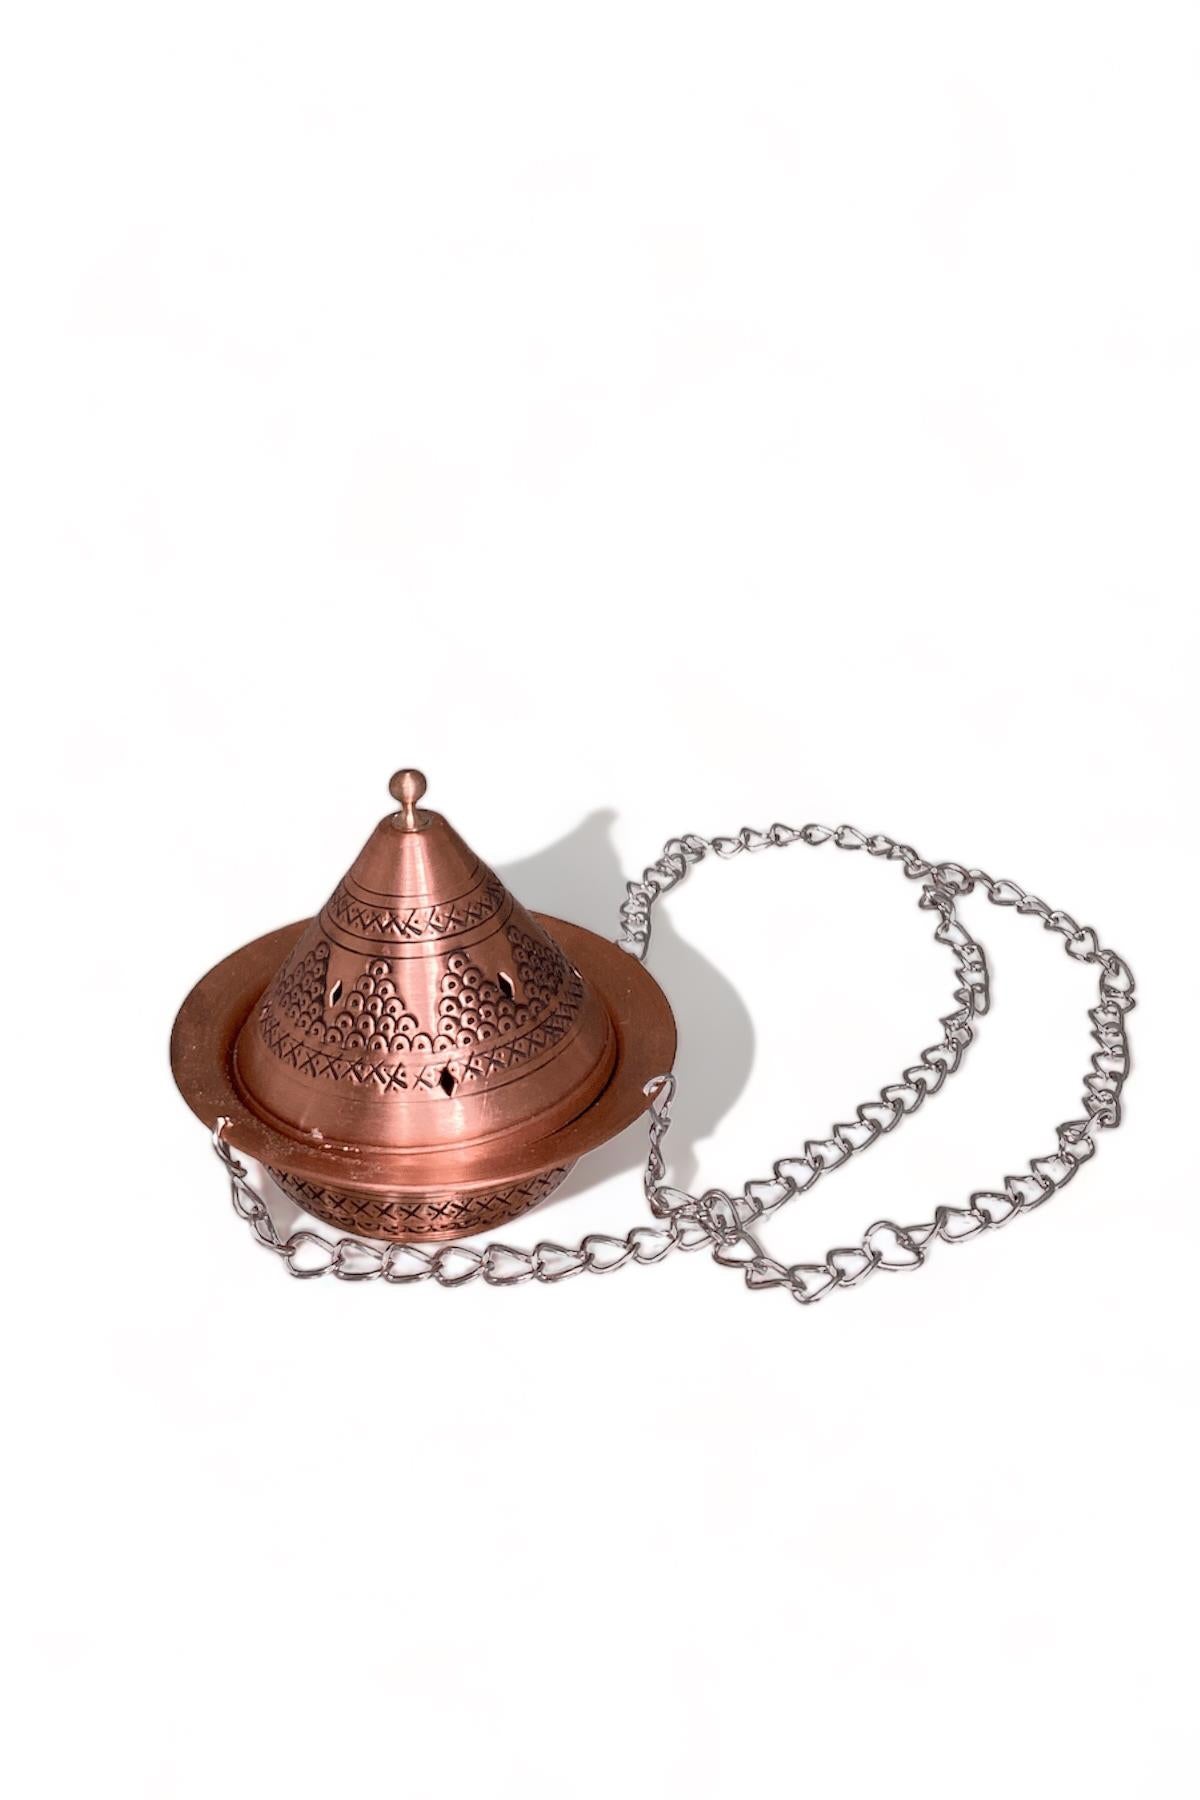 Copper Incense Burner with Chain